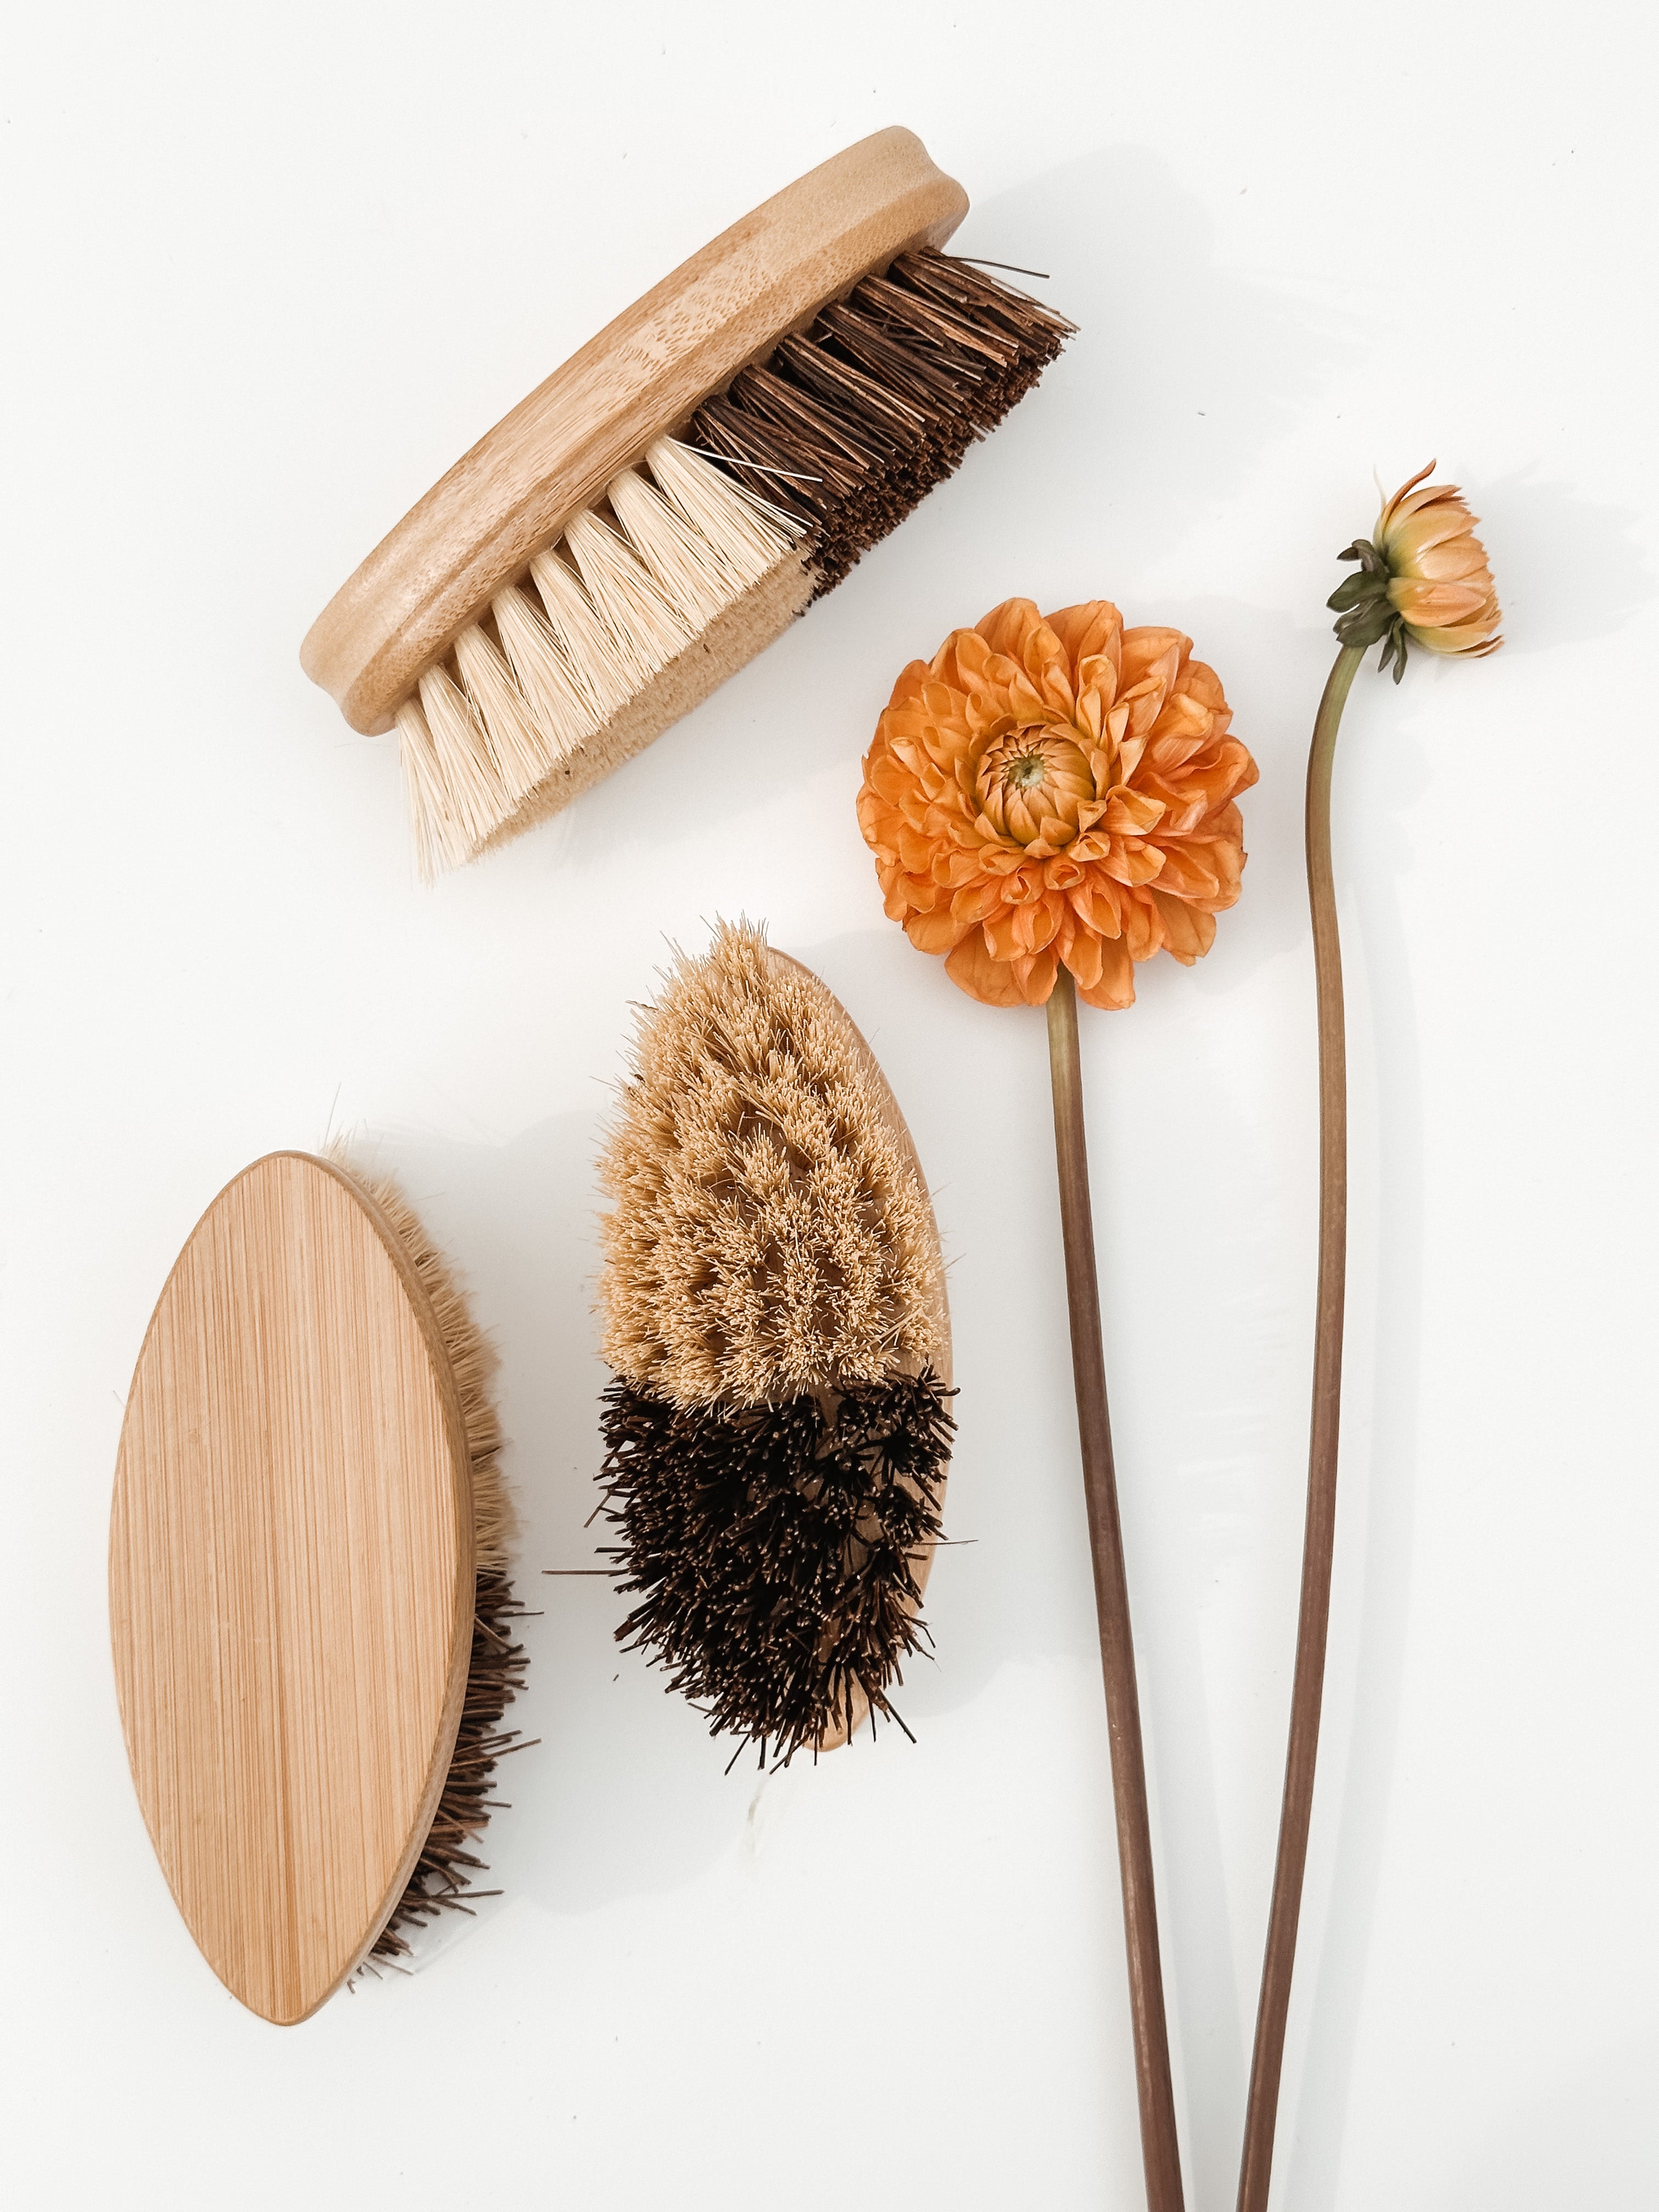 Coconut Fiber and Sisal cleaning brush displayed with dahlias